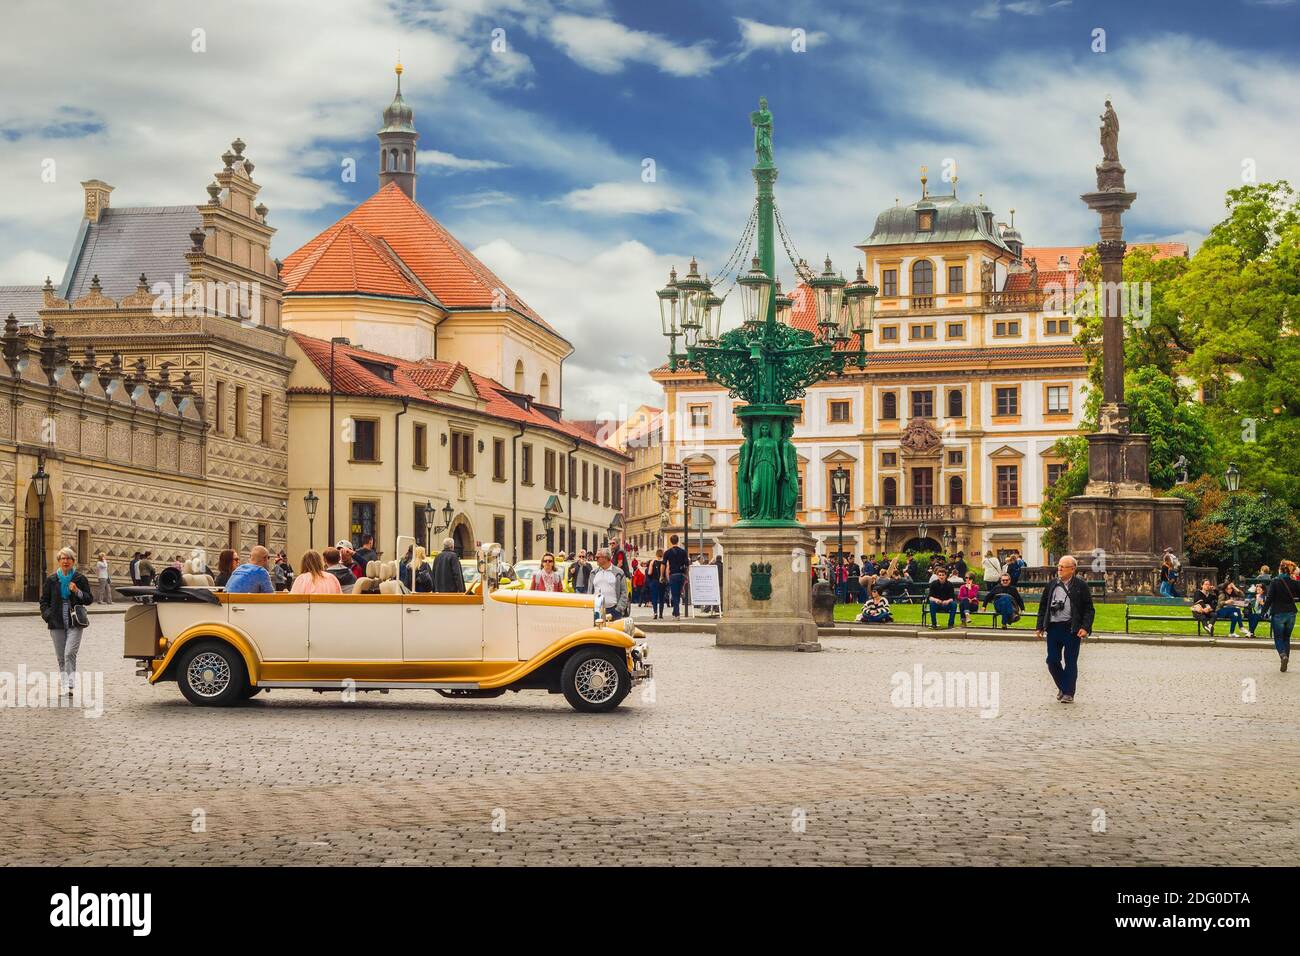 Prague, Czech Republic - May 23, 2015: And old timer car driving through Hradcany square Stock Photo